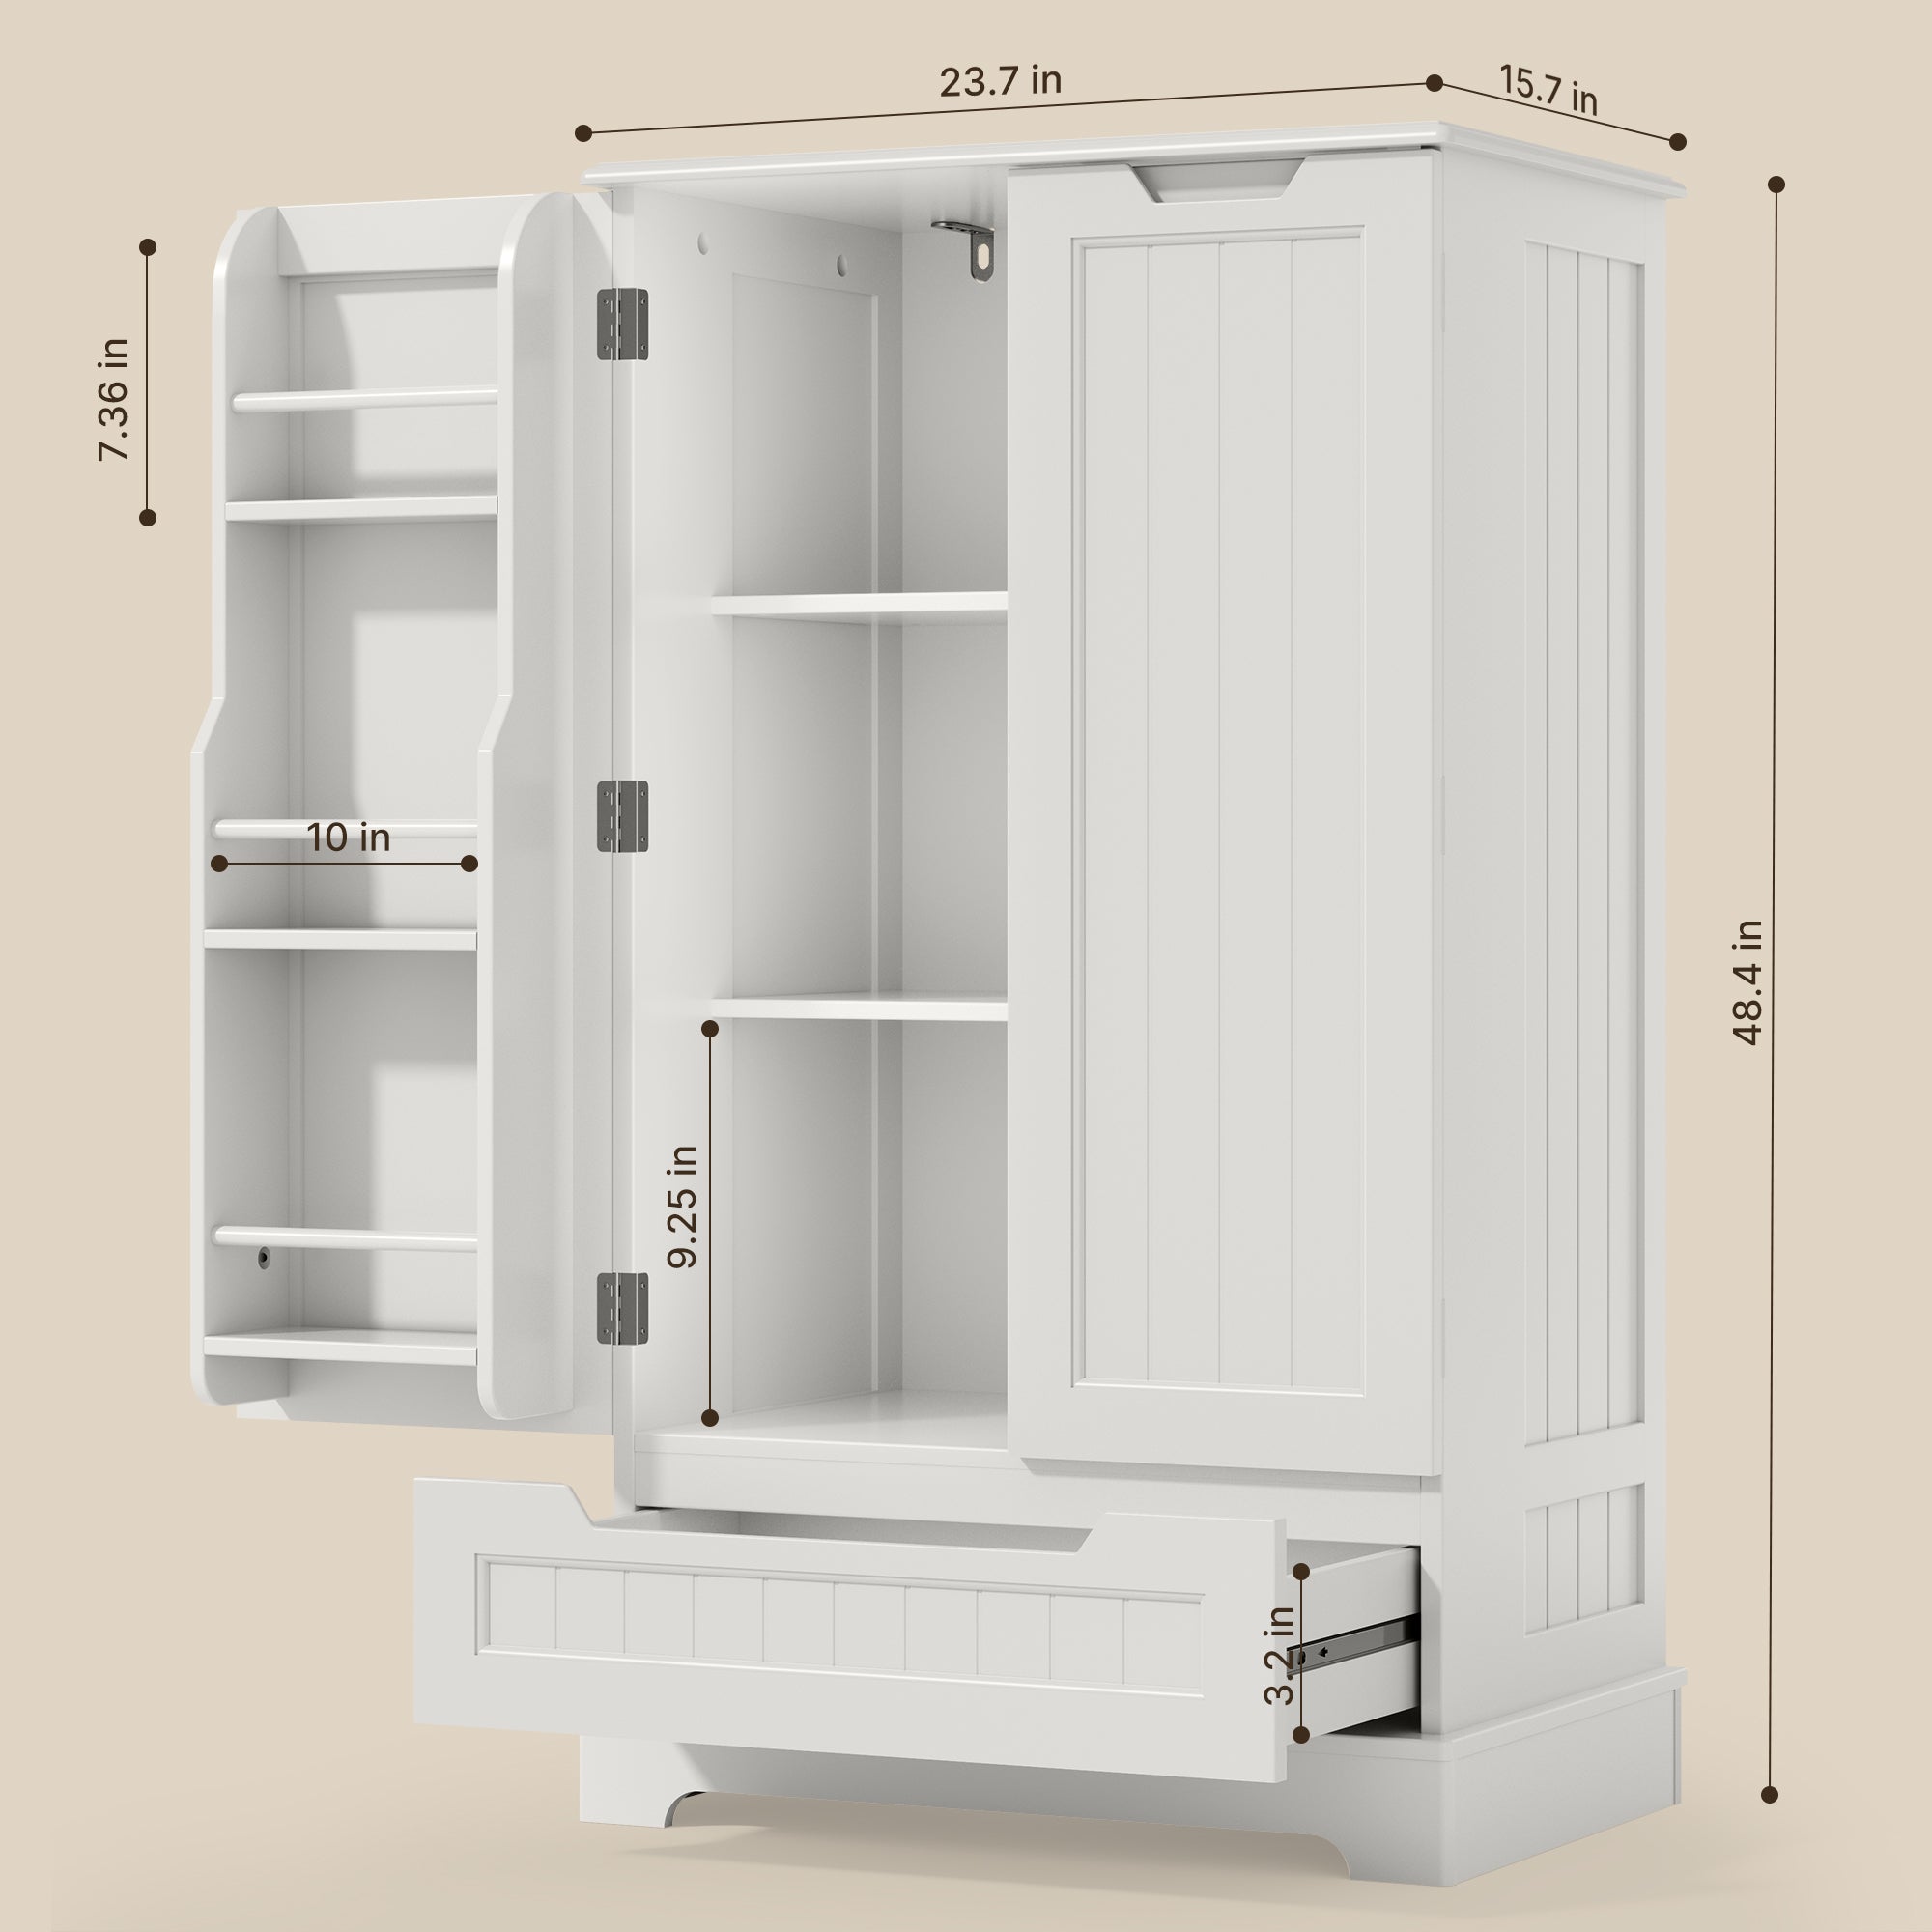 Gizoon AP28 47" Kitchen Pantry Storage Cabinet with Doors and Shelves